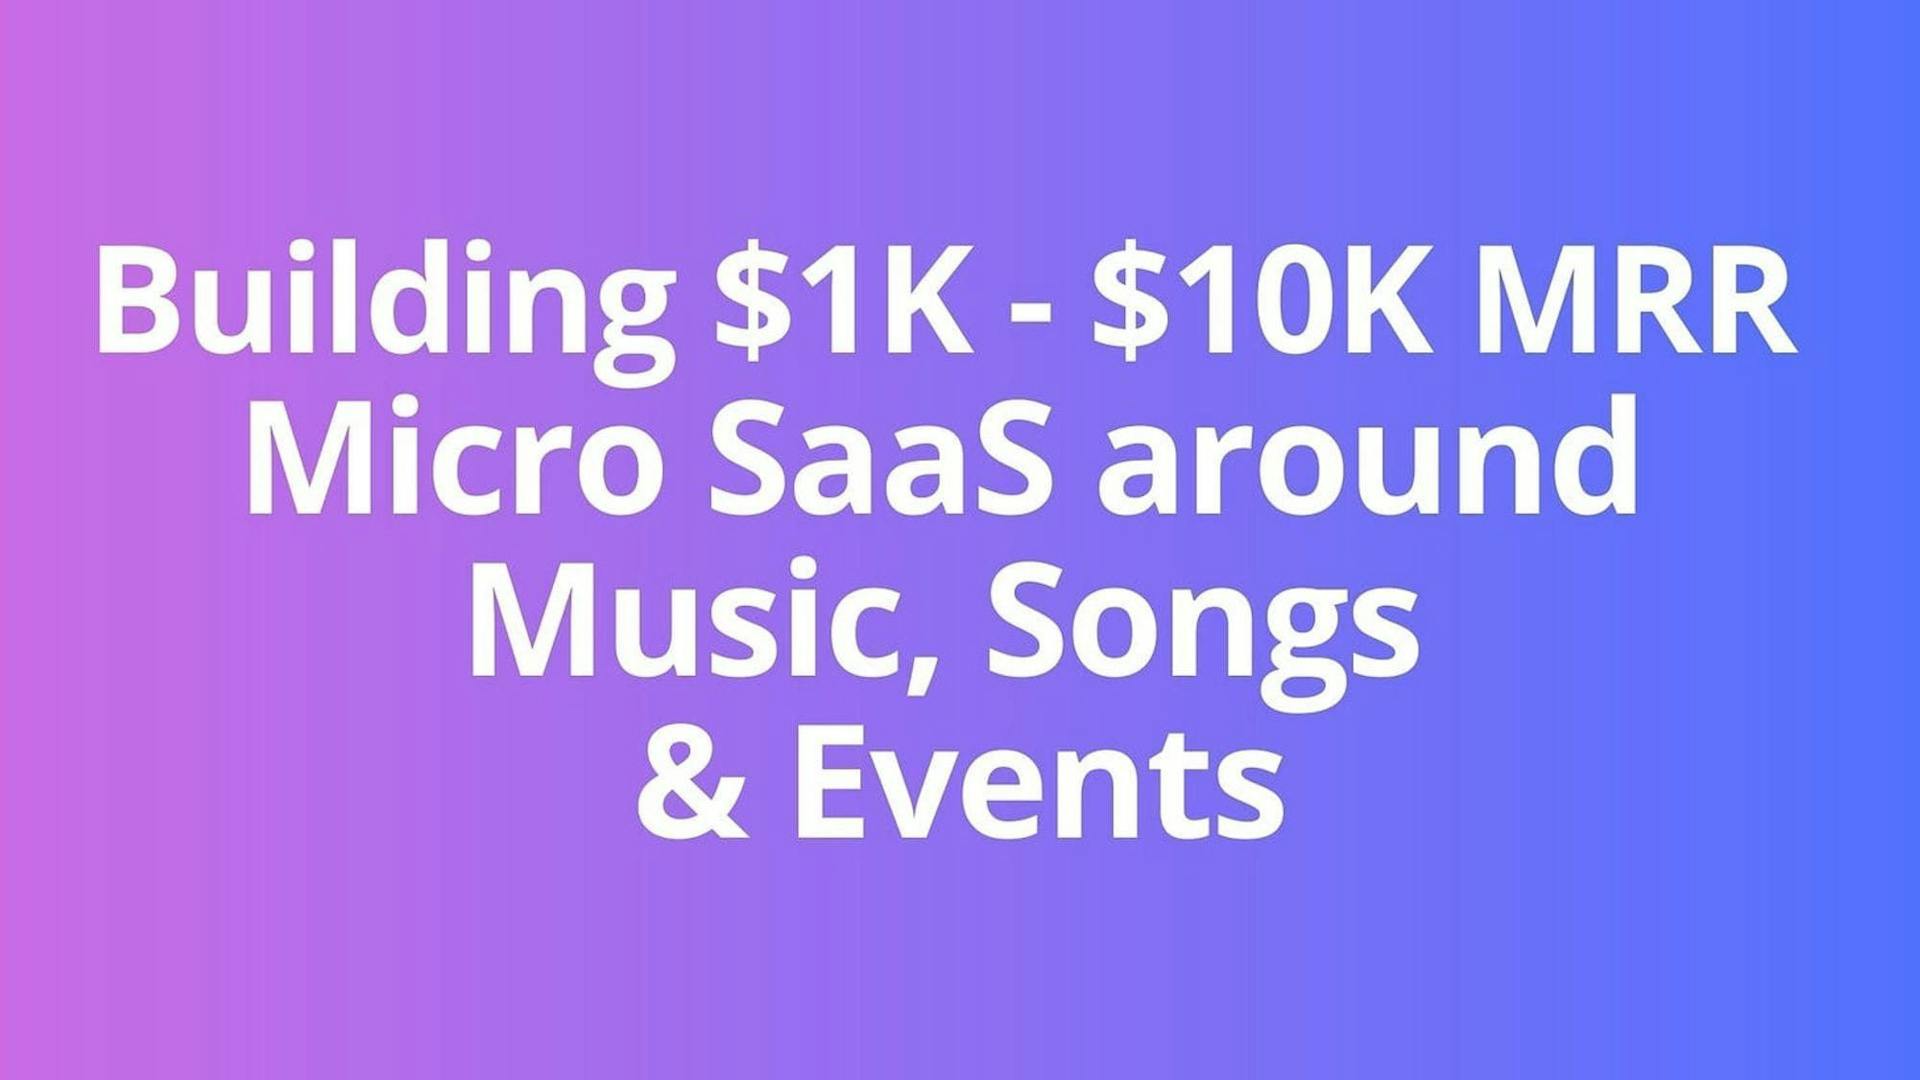 Cover Image for 3 Micro-SaaS Ideas around Music, Songs & Events